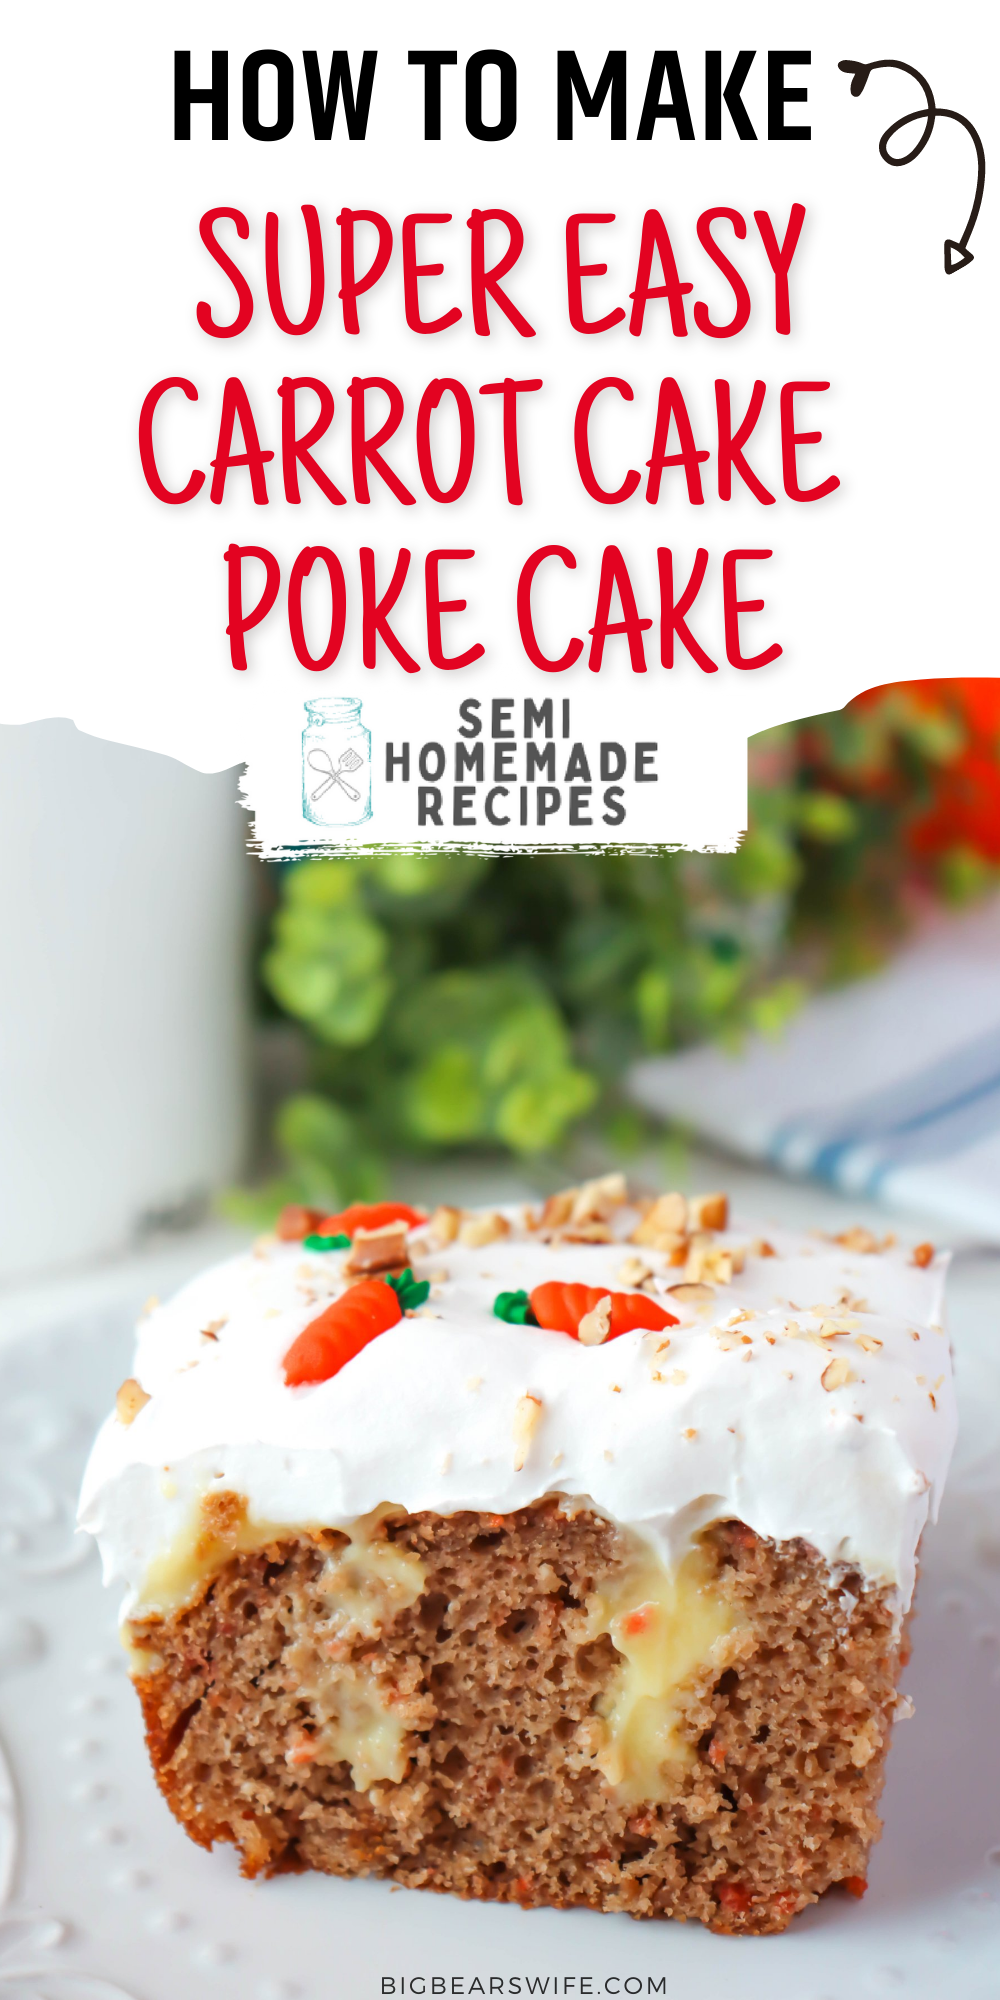 This super easy carrot poke cake is made with a tender carrot cake, vanilla pudding, whipped topping and decorated with the cutest little royal icing carrots and crushed pecans. Don't like pecans? Leave them off!